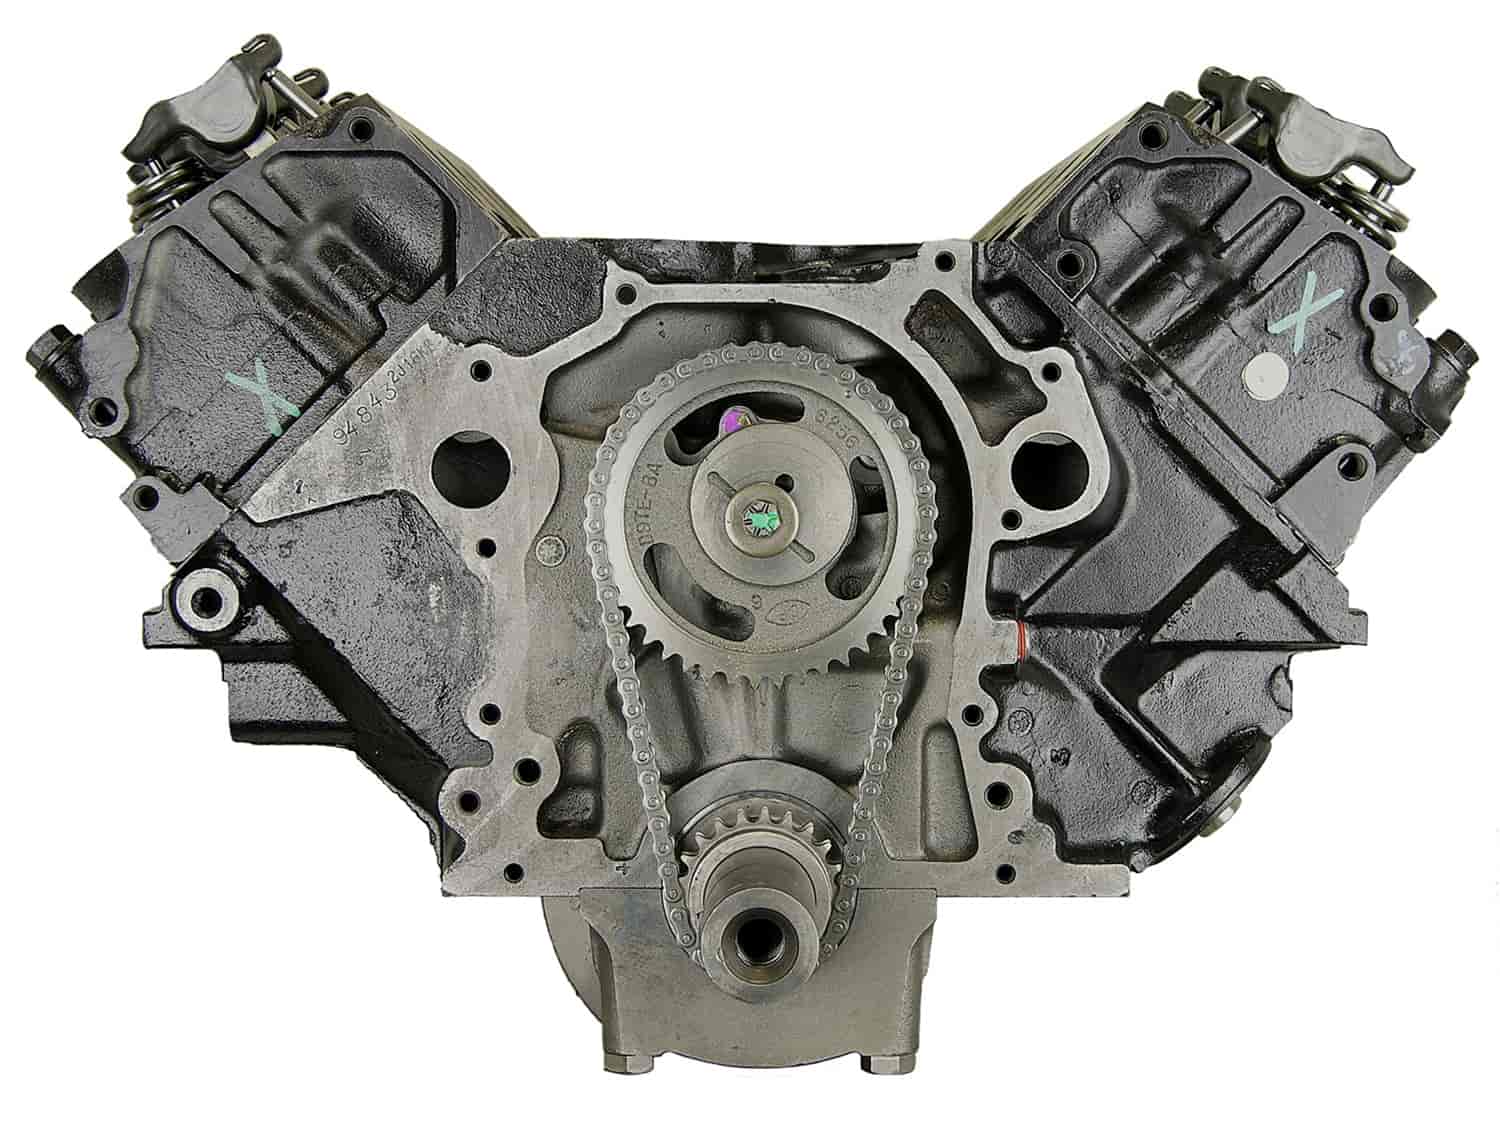 Remanufactured Crate Engine for 1997-1998 Ford Truck with